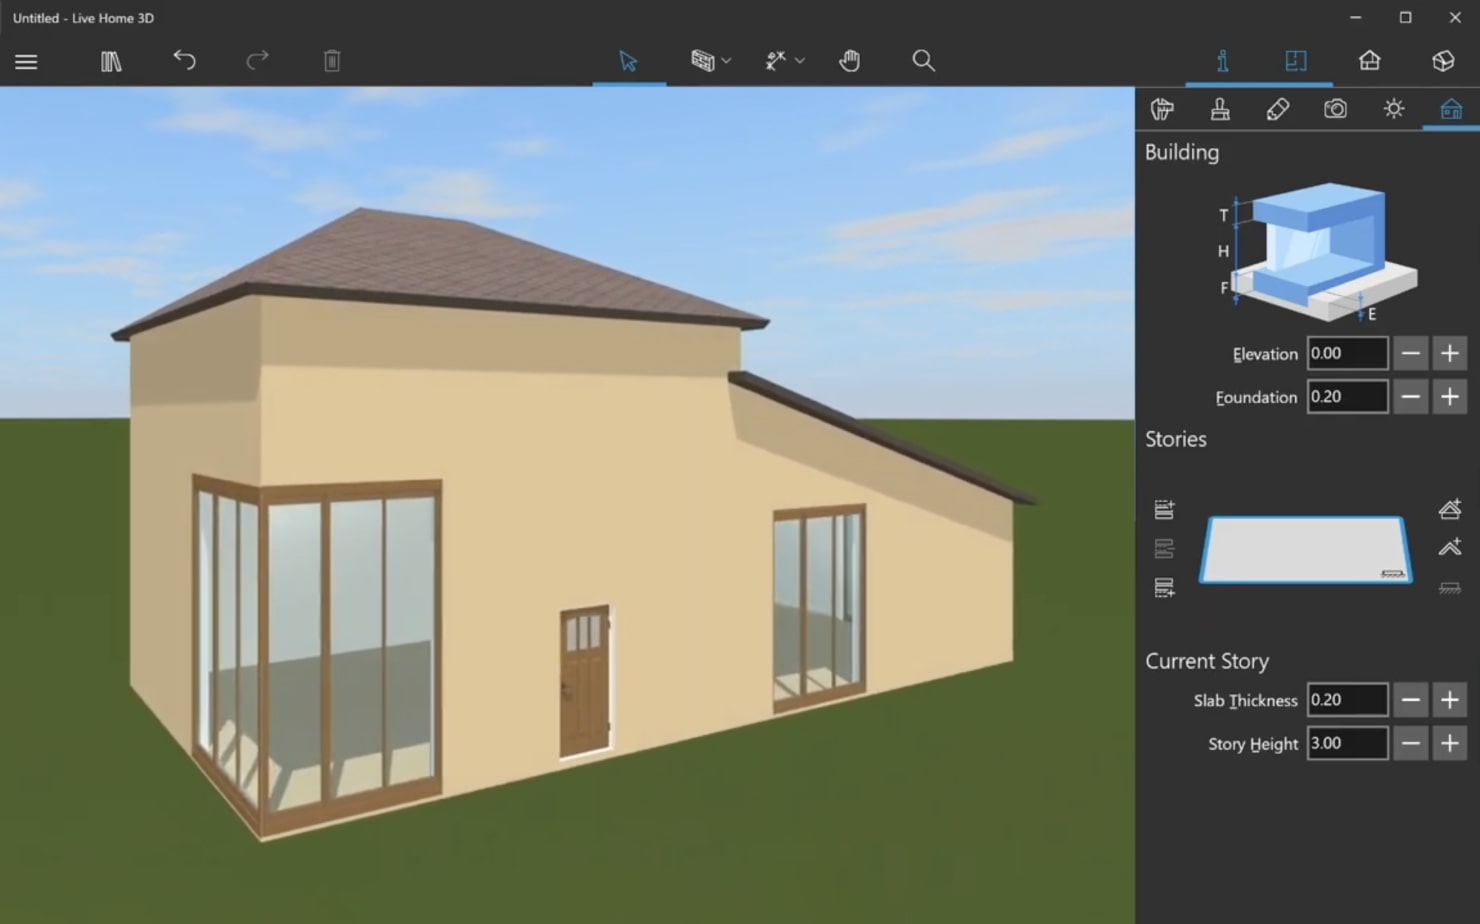 A screenshot  of a split level house project created in Live Home 3D.